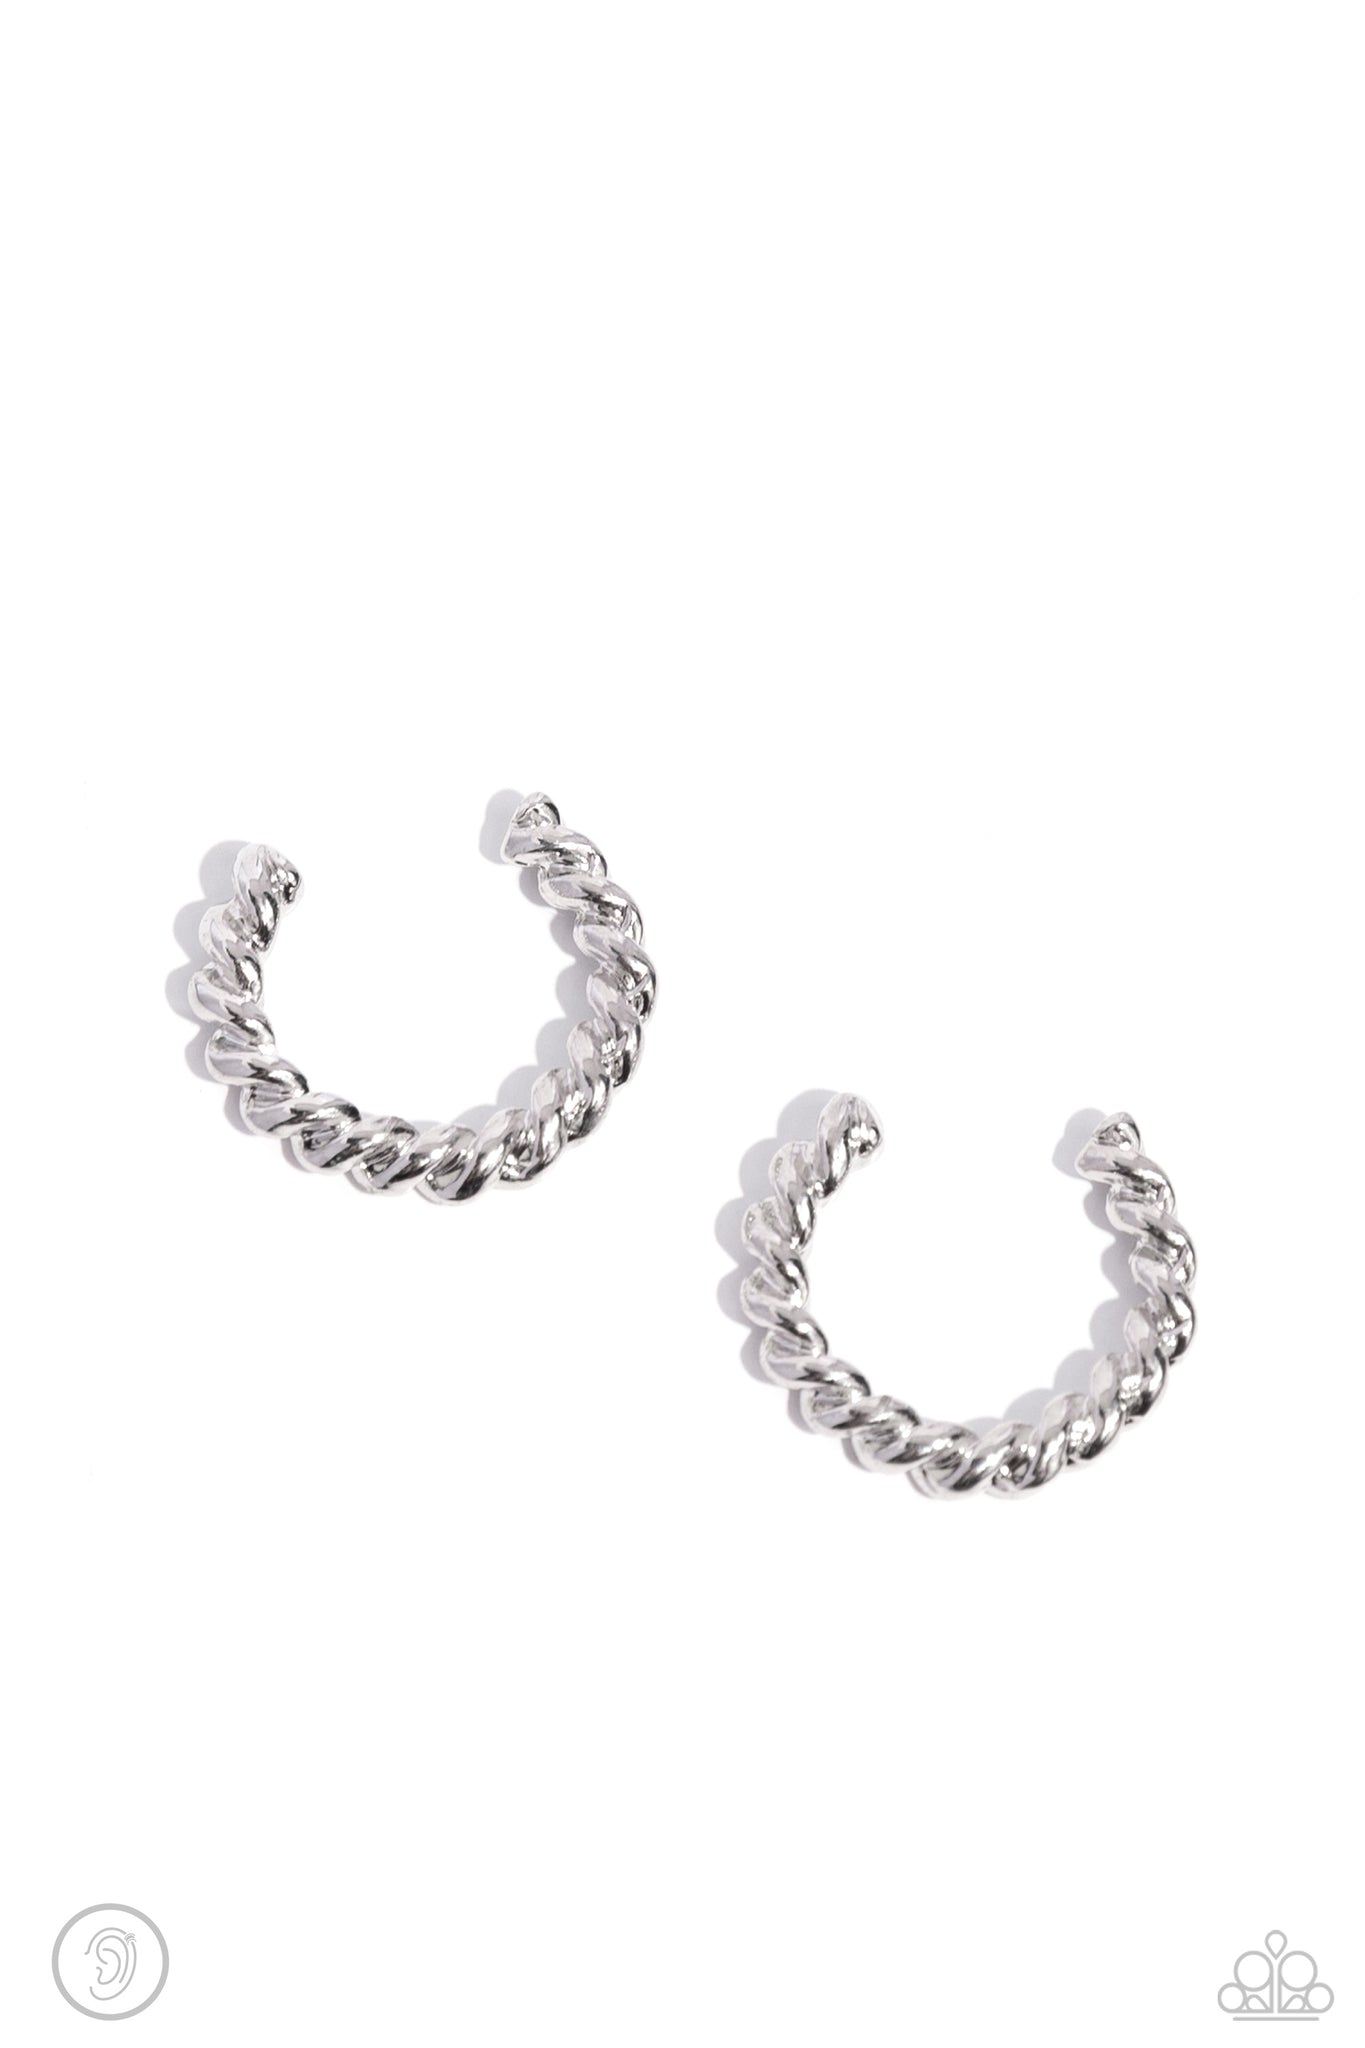 Twisted Travel Silver Cuff Earring